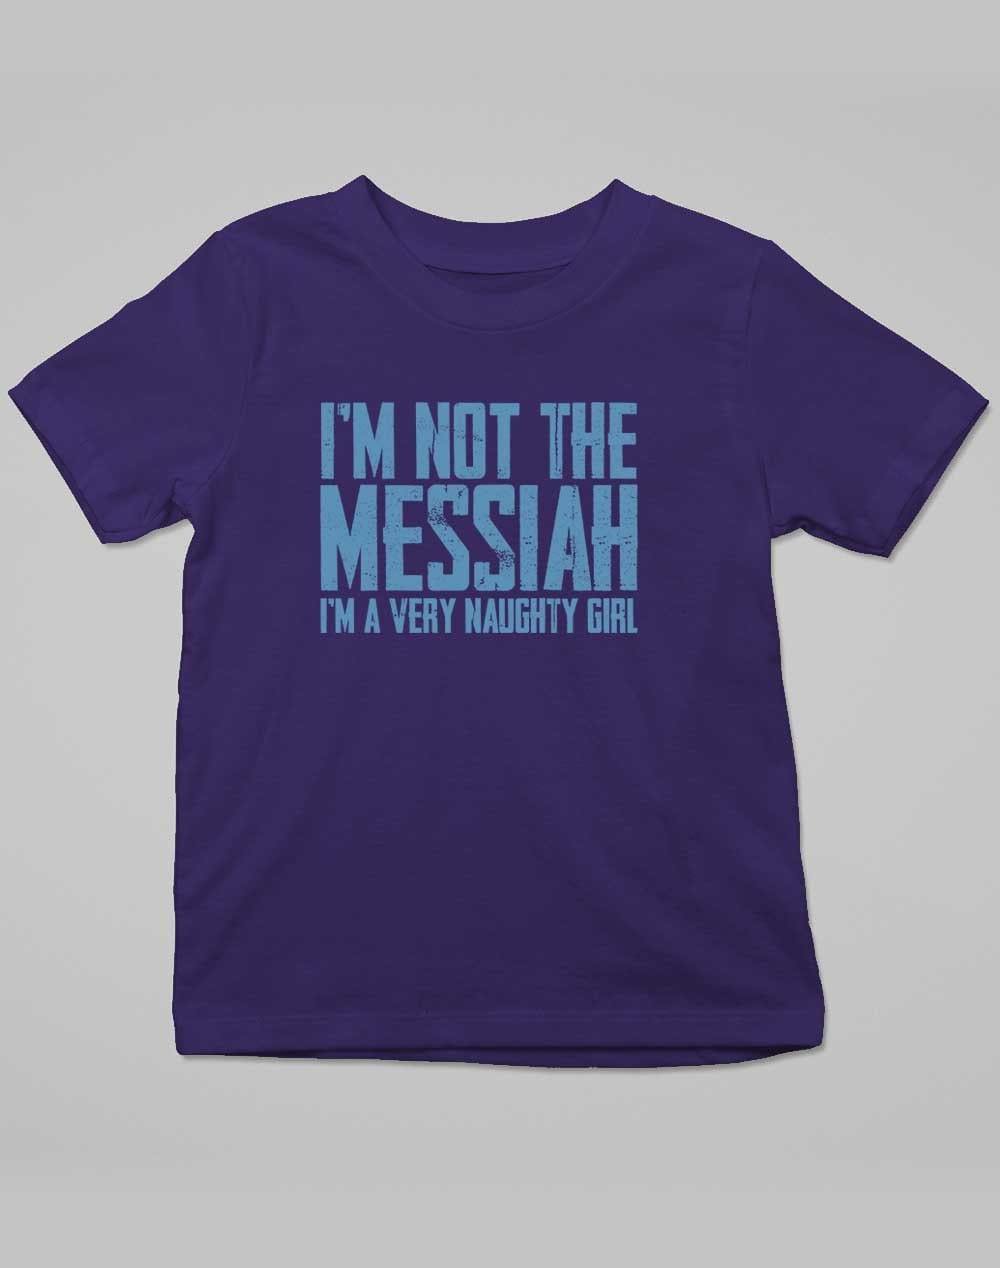 I'm Not the Messiah I'm a Very Naughty Girl Kids T-Shirt 3-4 years / Navy  - Off World Tees